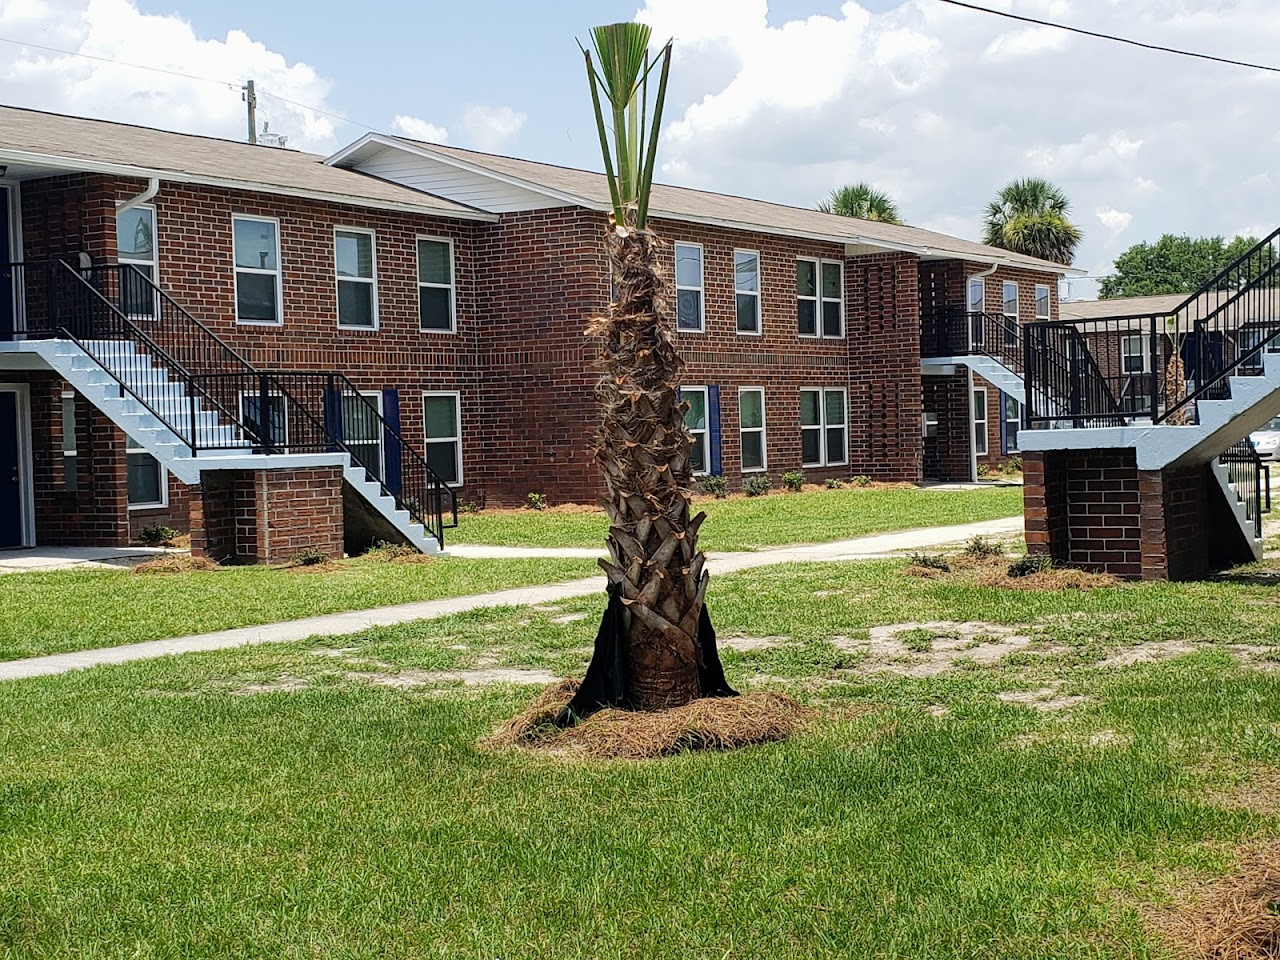 Photo of PERRYTOWN. Affordable housing located at 500 SOUTH WARNER AVENUE PERRY, FL 32348